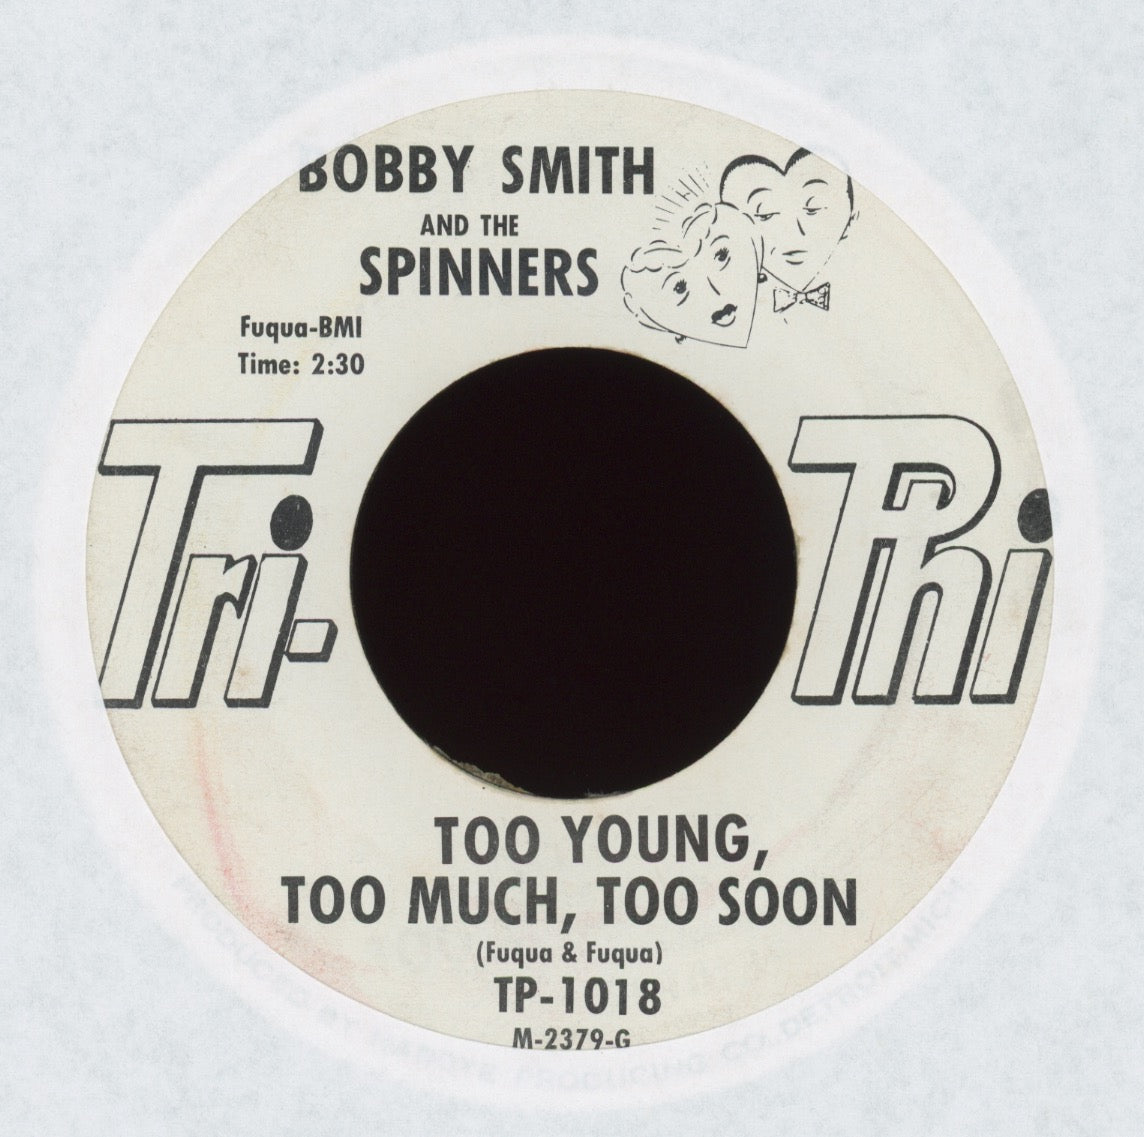 Bobbie Smith - Too Young, Too Much, Too Soon on Tri Phi Promo